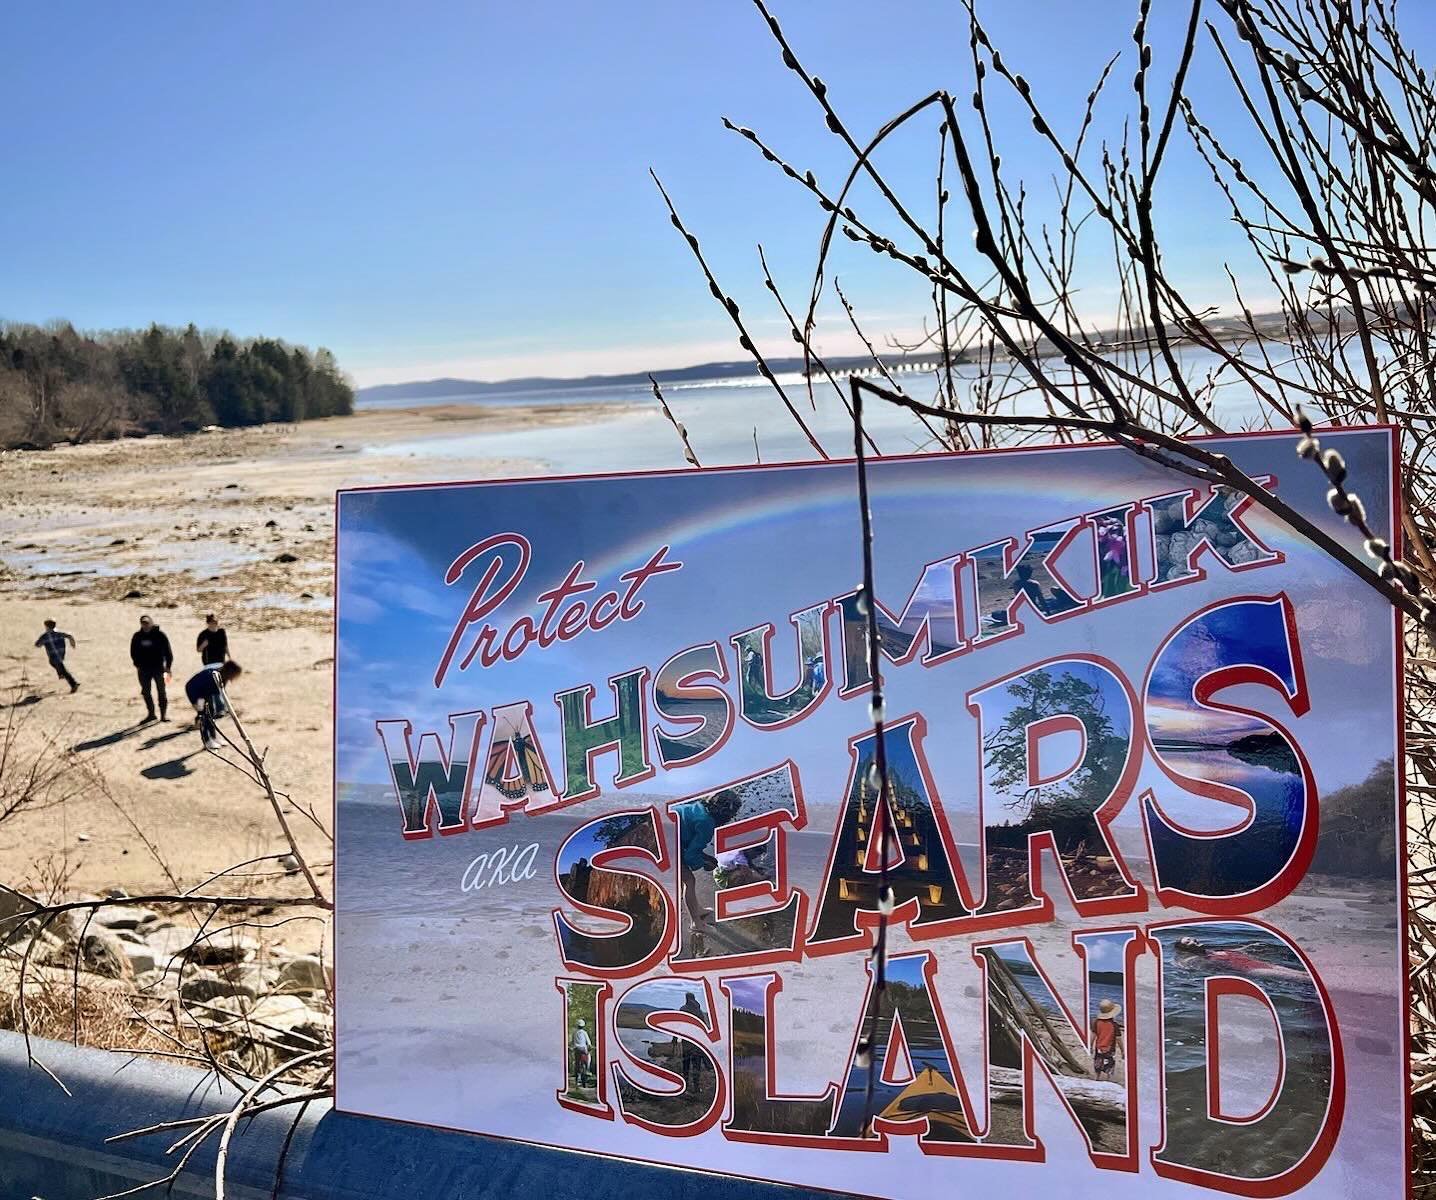 One of our postcards got to visit the island today! Tomorrow I&rsquo;ll be heading back to the statehouse asking folks to vote NO on LD 2266. Join us at 9am on the 3rd floor if you&rsquo;re able! #wahsumkik #savewahsumkik #searsisland #savesearsislan